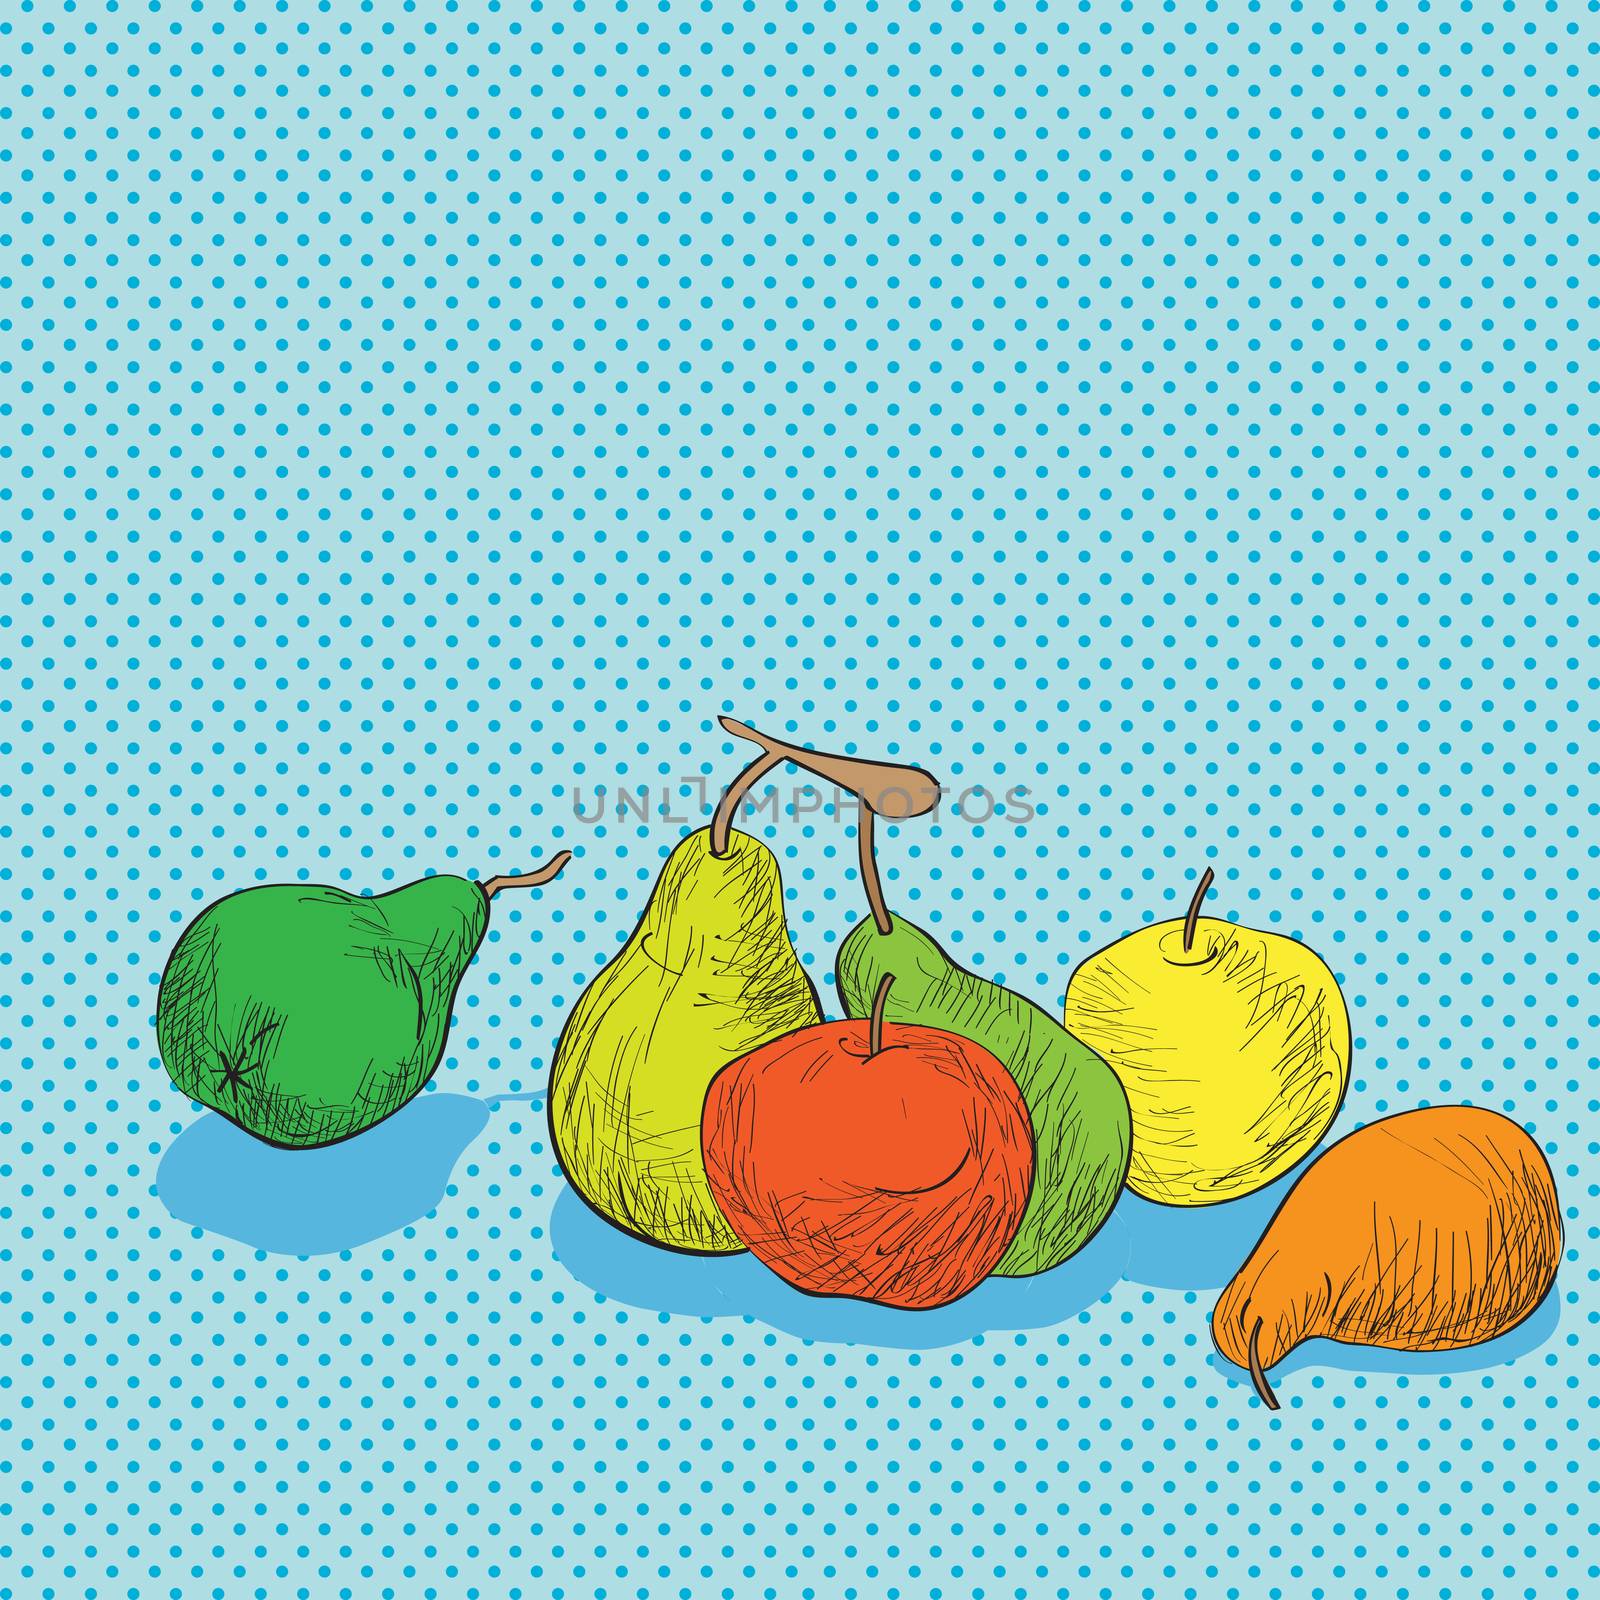 Hand drawn illustration of a composition with fruits, apples and pears over a Pop Art background with dots